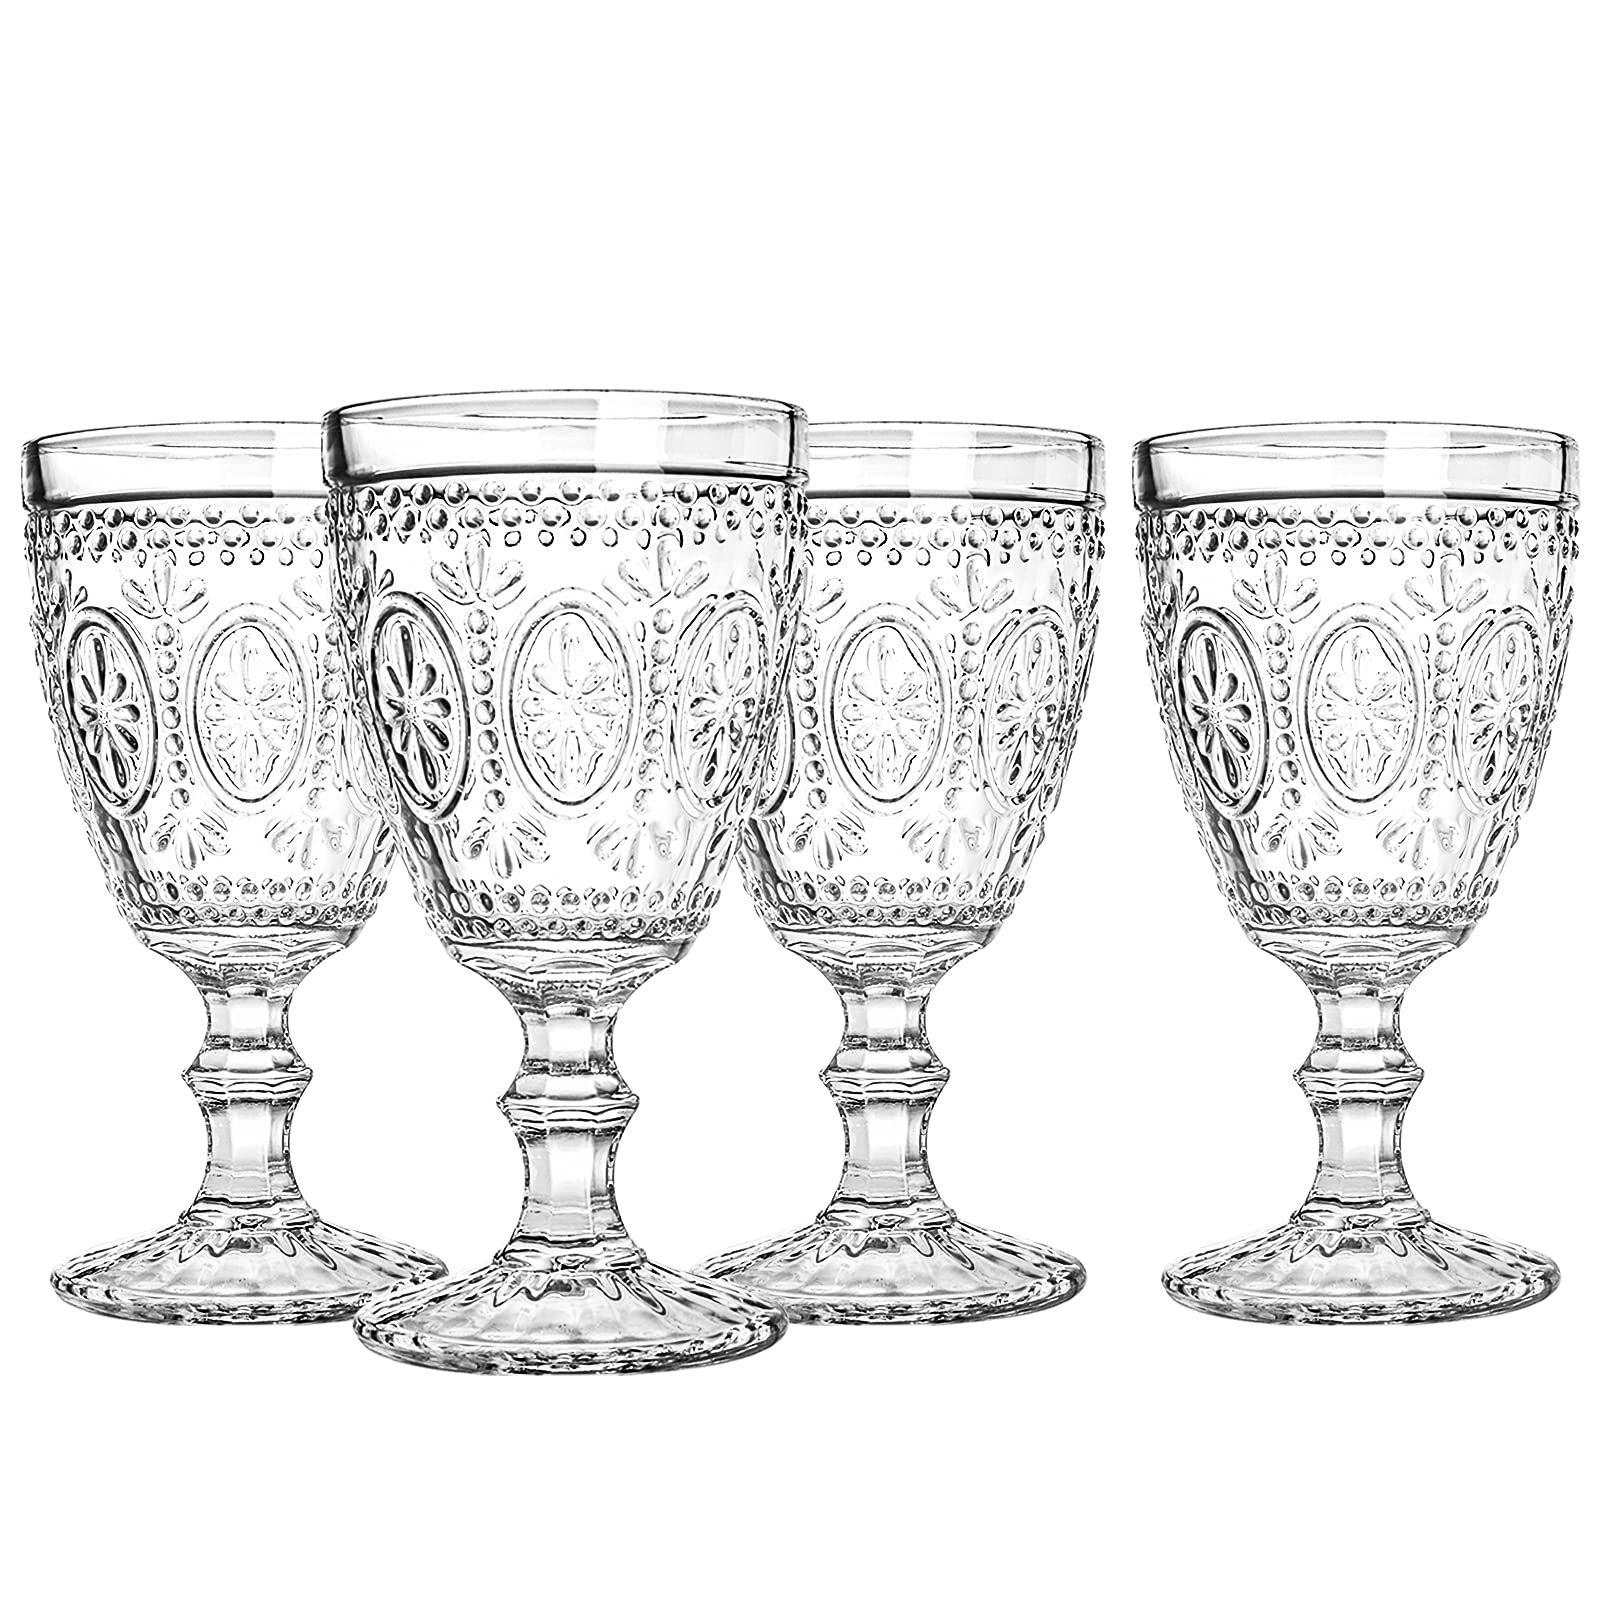 Bekith Classic Goblet Party Glasses, Wine Glasses Goblets, Iced Tea Glasses, Beverage Stemmed Glass Cups, 12 Ounce, Set of 4